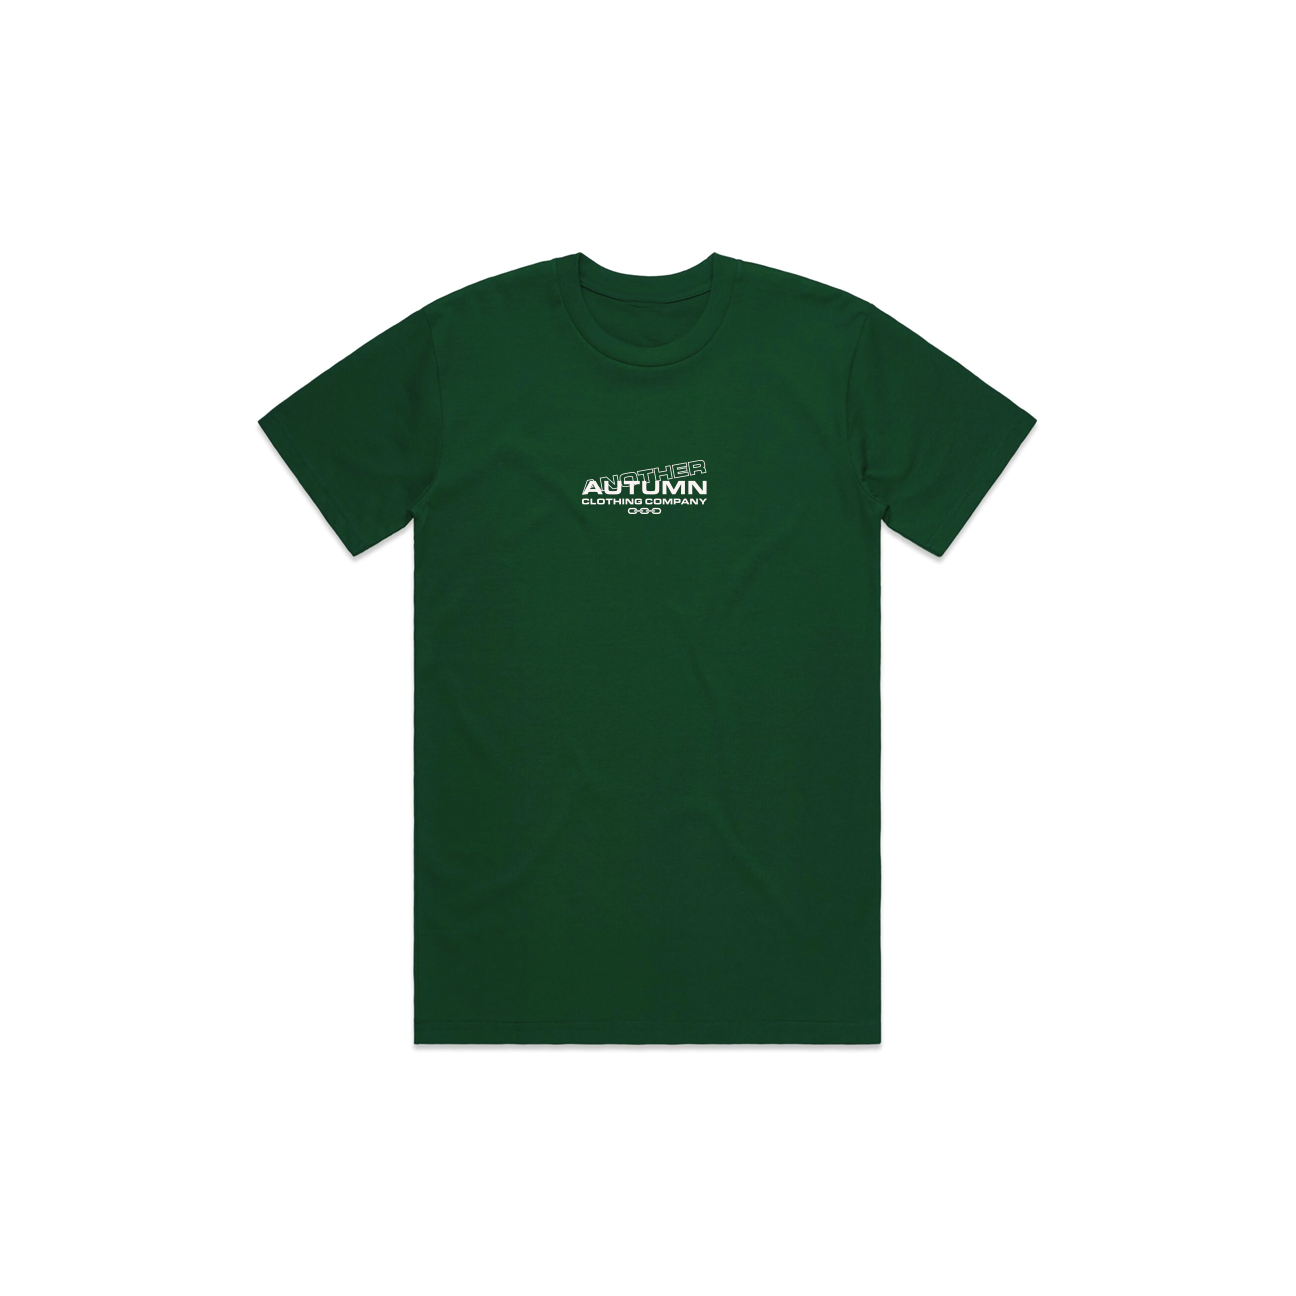 The Link Up T-Shirt (Black/Green)